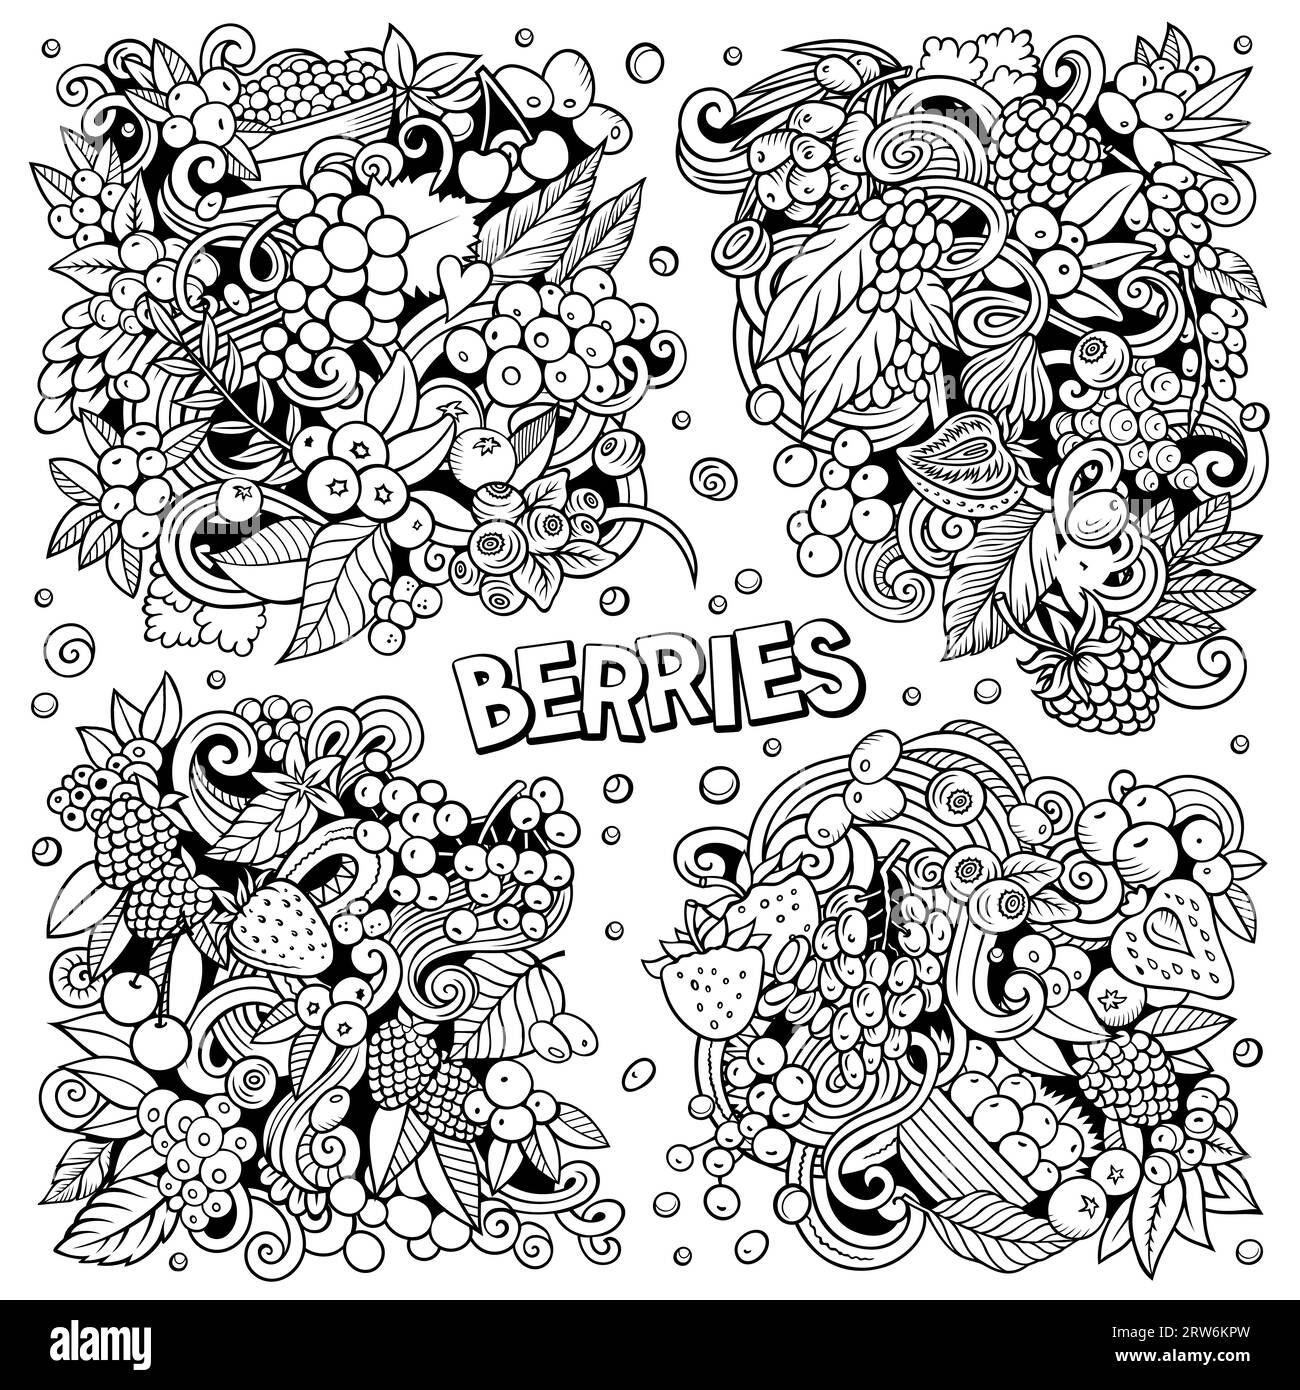 Berries cartoon vector doodle designs set. Sketchy detailed compositions with lot of nature food objects and symbols. Stock Vector